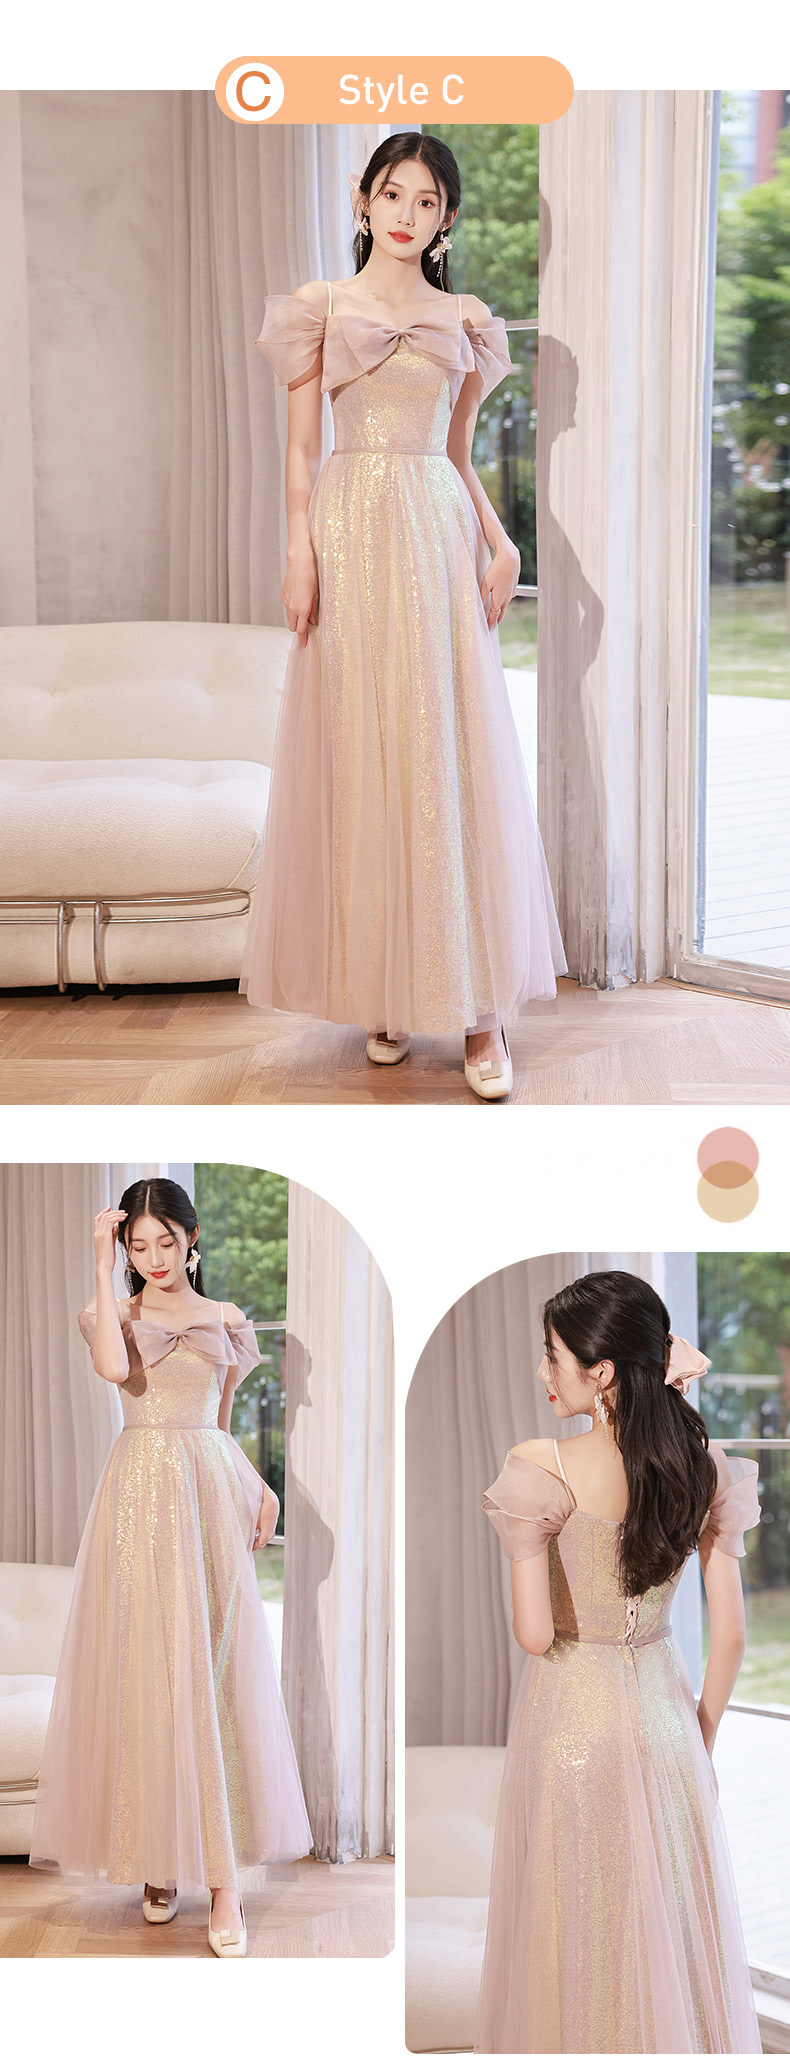 Fairy-Starry-Pink-Slim-Bridesmaid-Long-Dress-Wedding-Party-Gown18.jpg